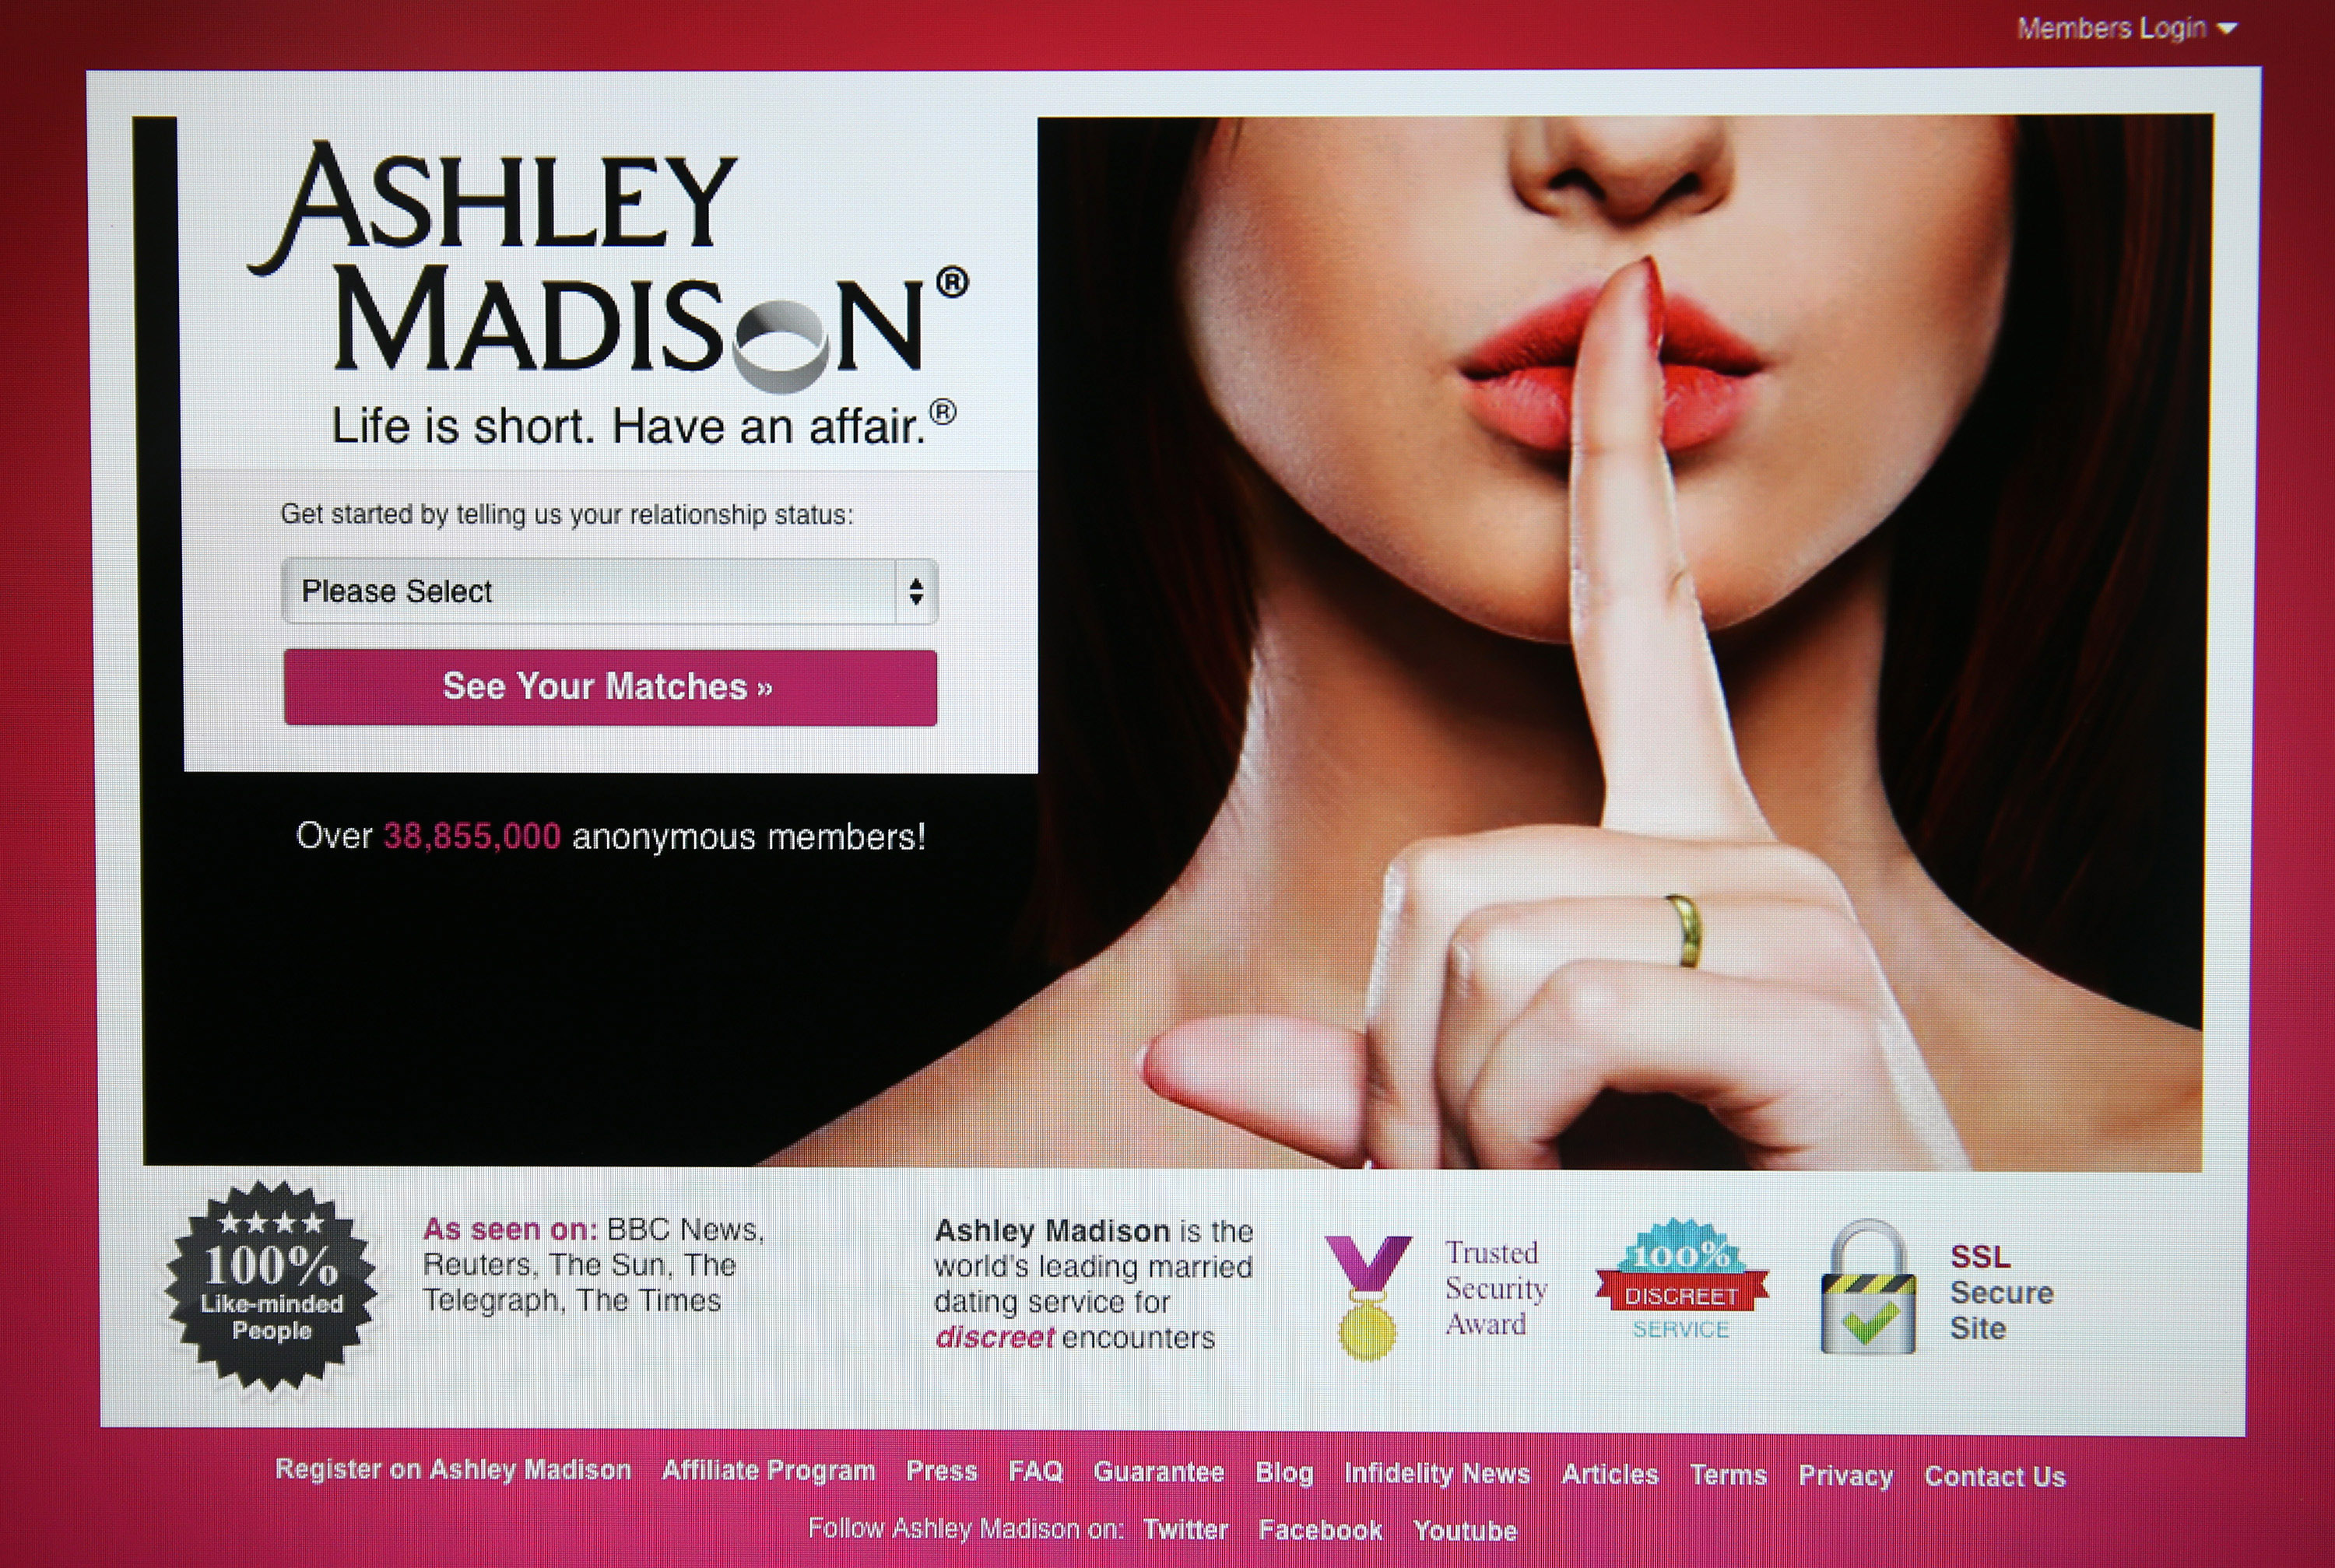 The Ashley Madison website is displayed on Aug. 19, 2015, in London, England. (Carl Court—Getty Images)